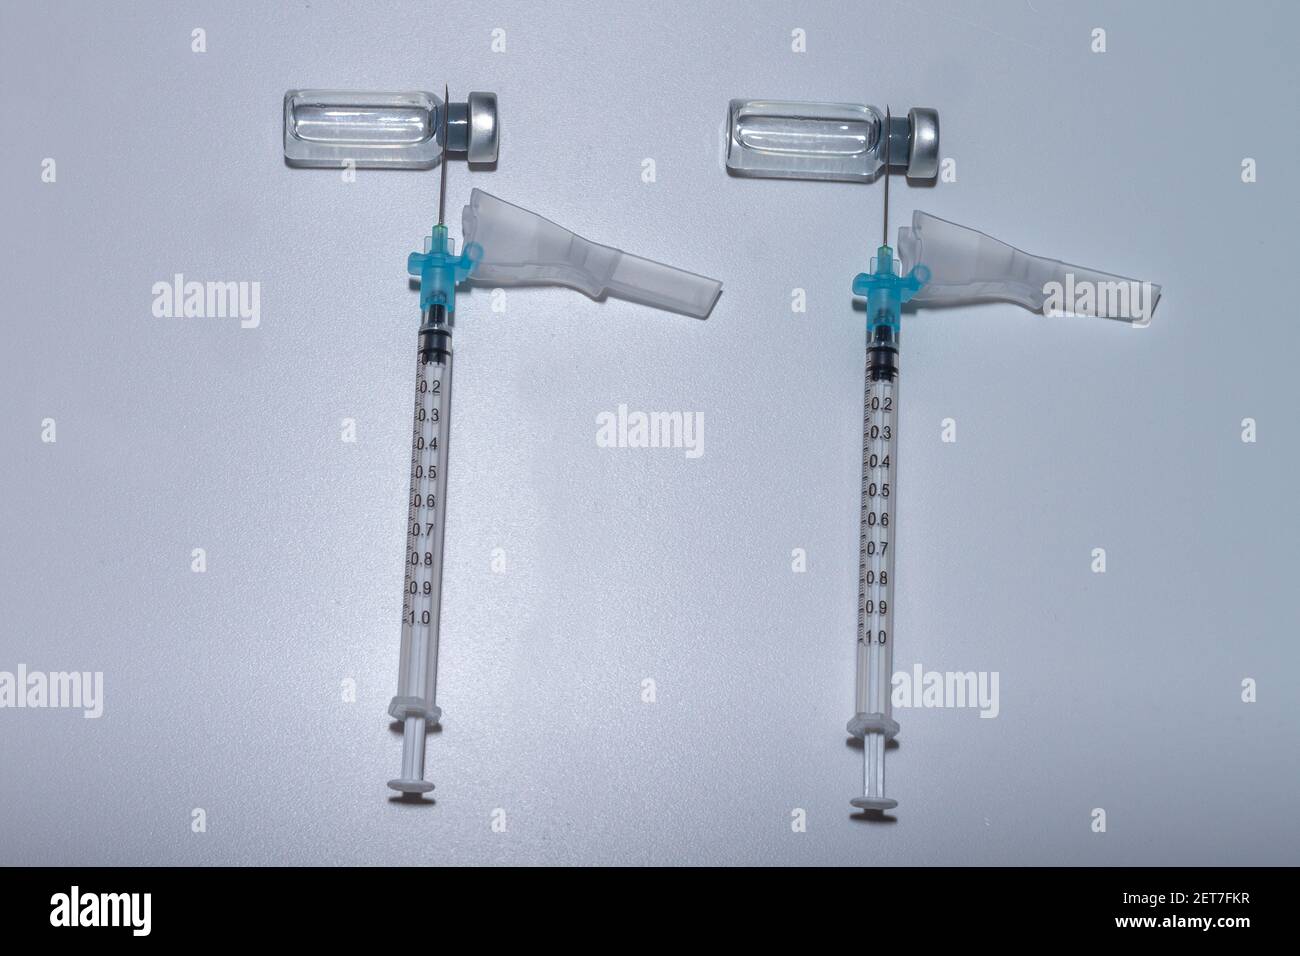 Two dose vaccination concept. Two syringes on two vials of vaccine against Covid-19 (SARS-COV2), representing that most vaccines must be Stock Photo